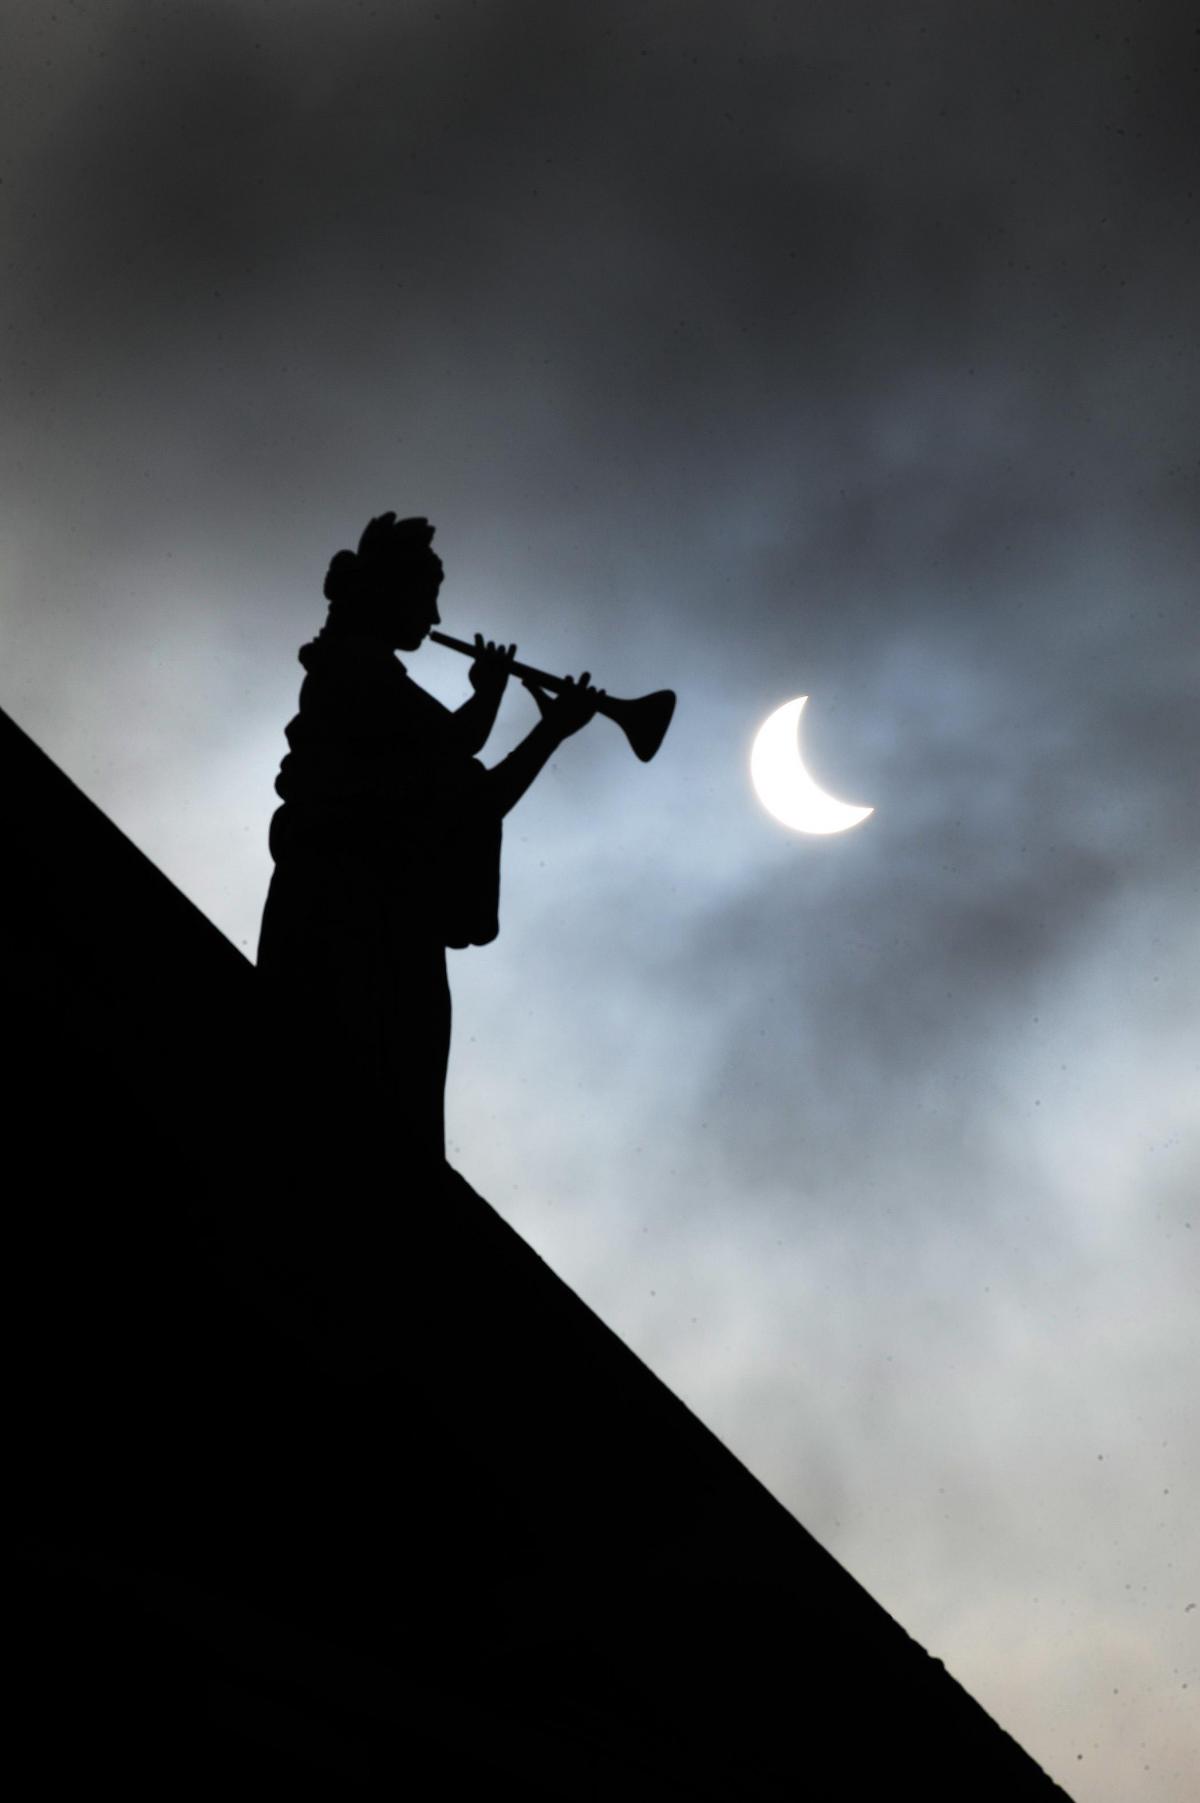 The solar eclipse from Broad Street